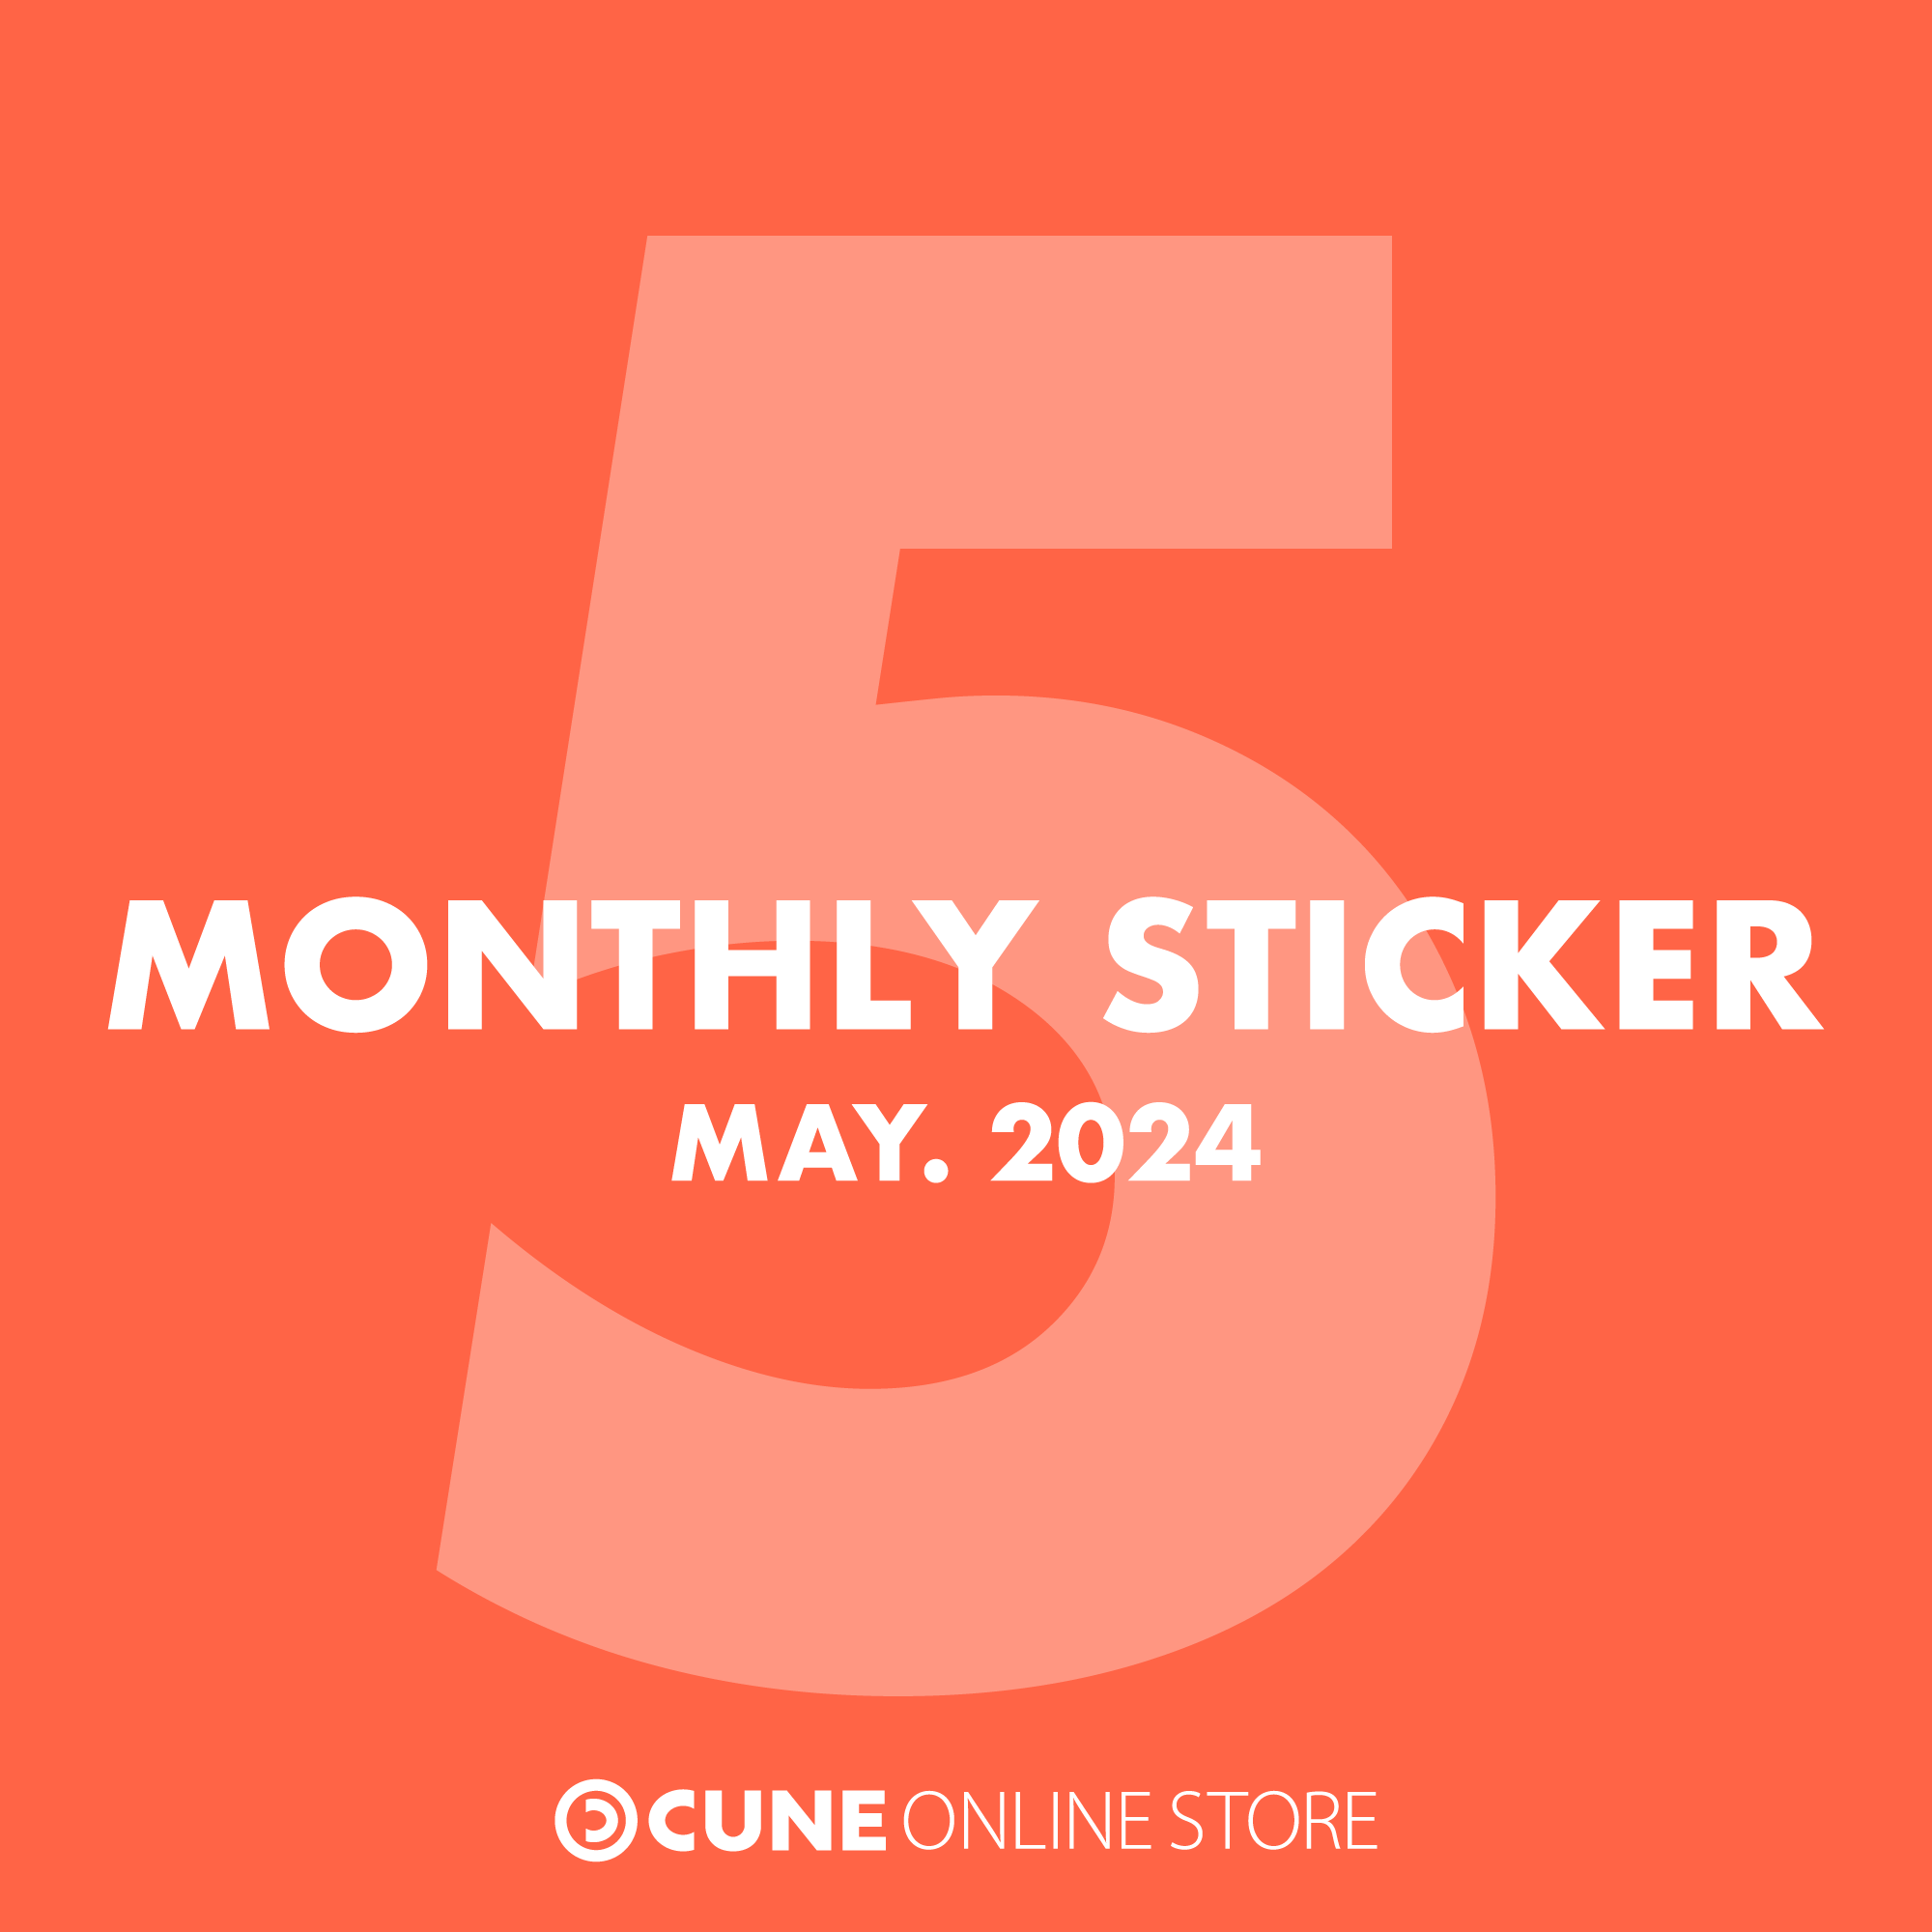 CUNE MONTHLY STICKER may 2024